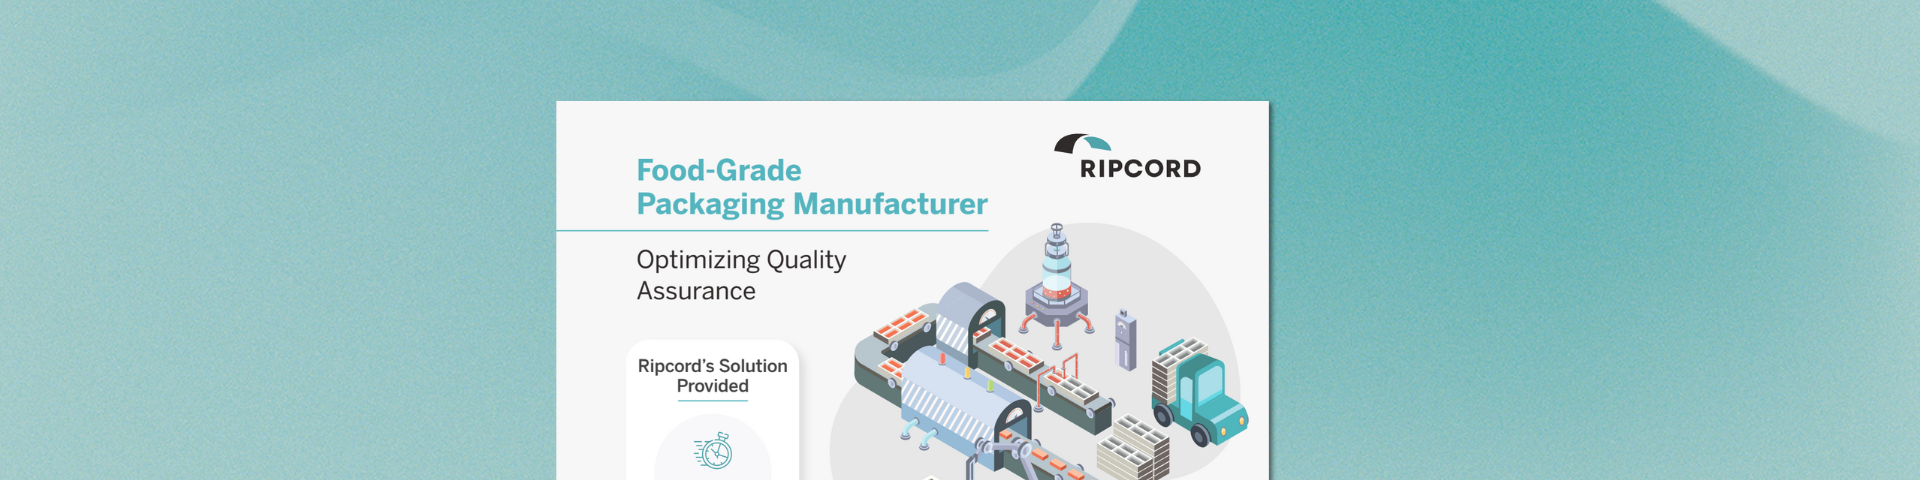 Food-Grade Packaging Manufacturer Case Study - Ripcord